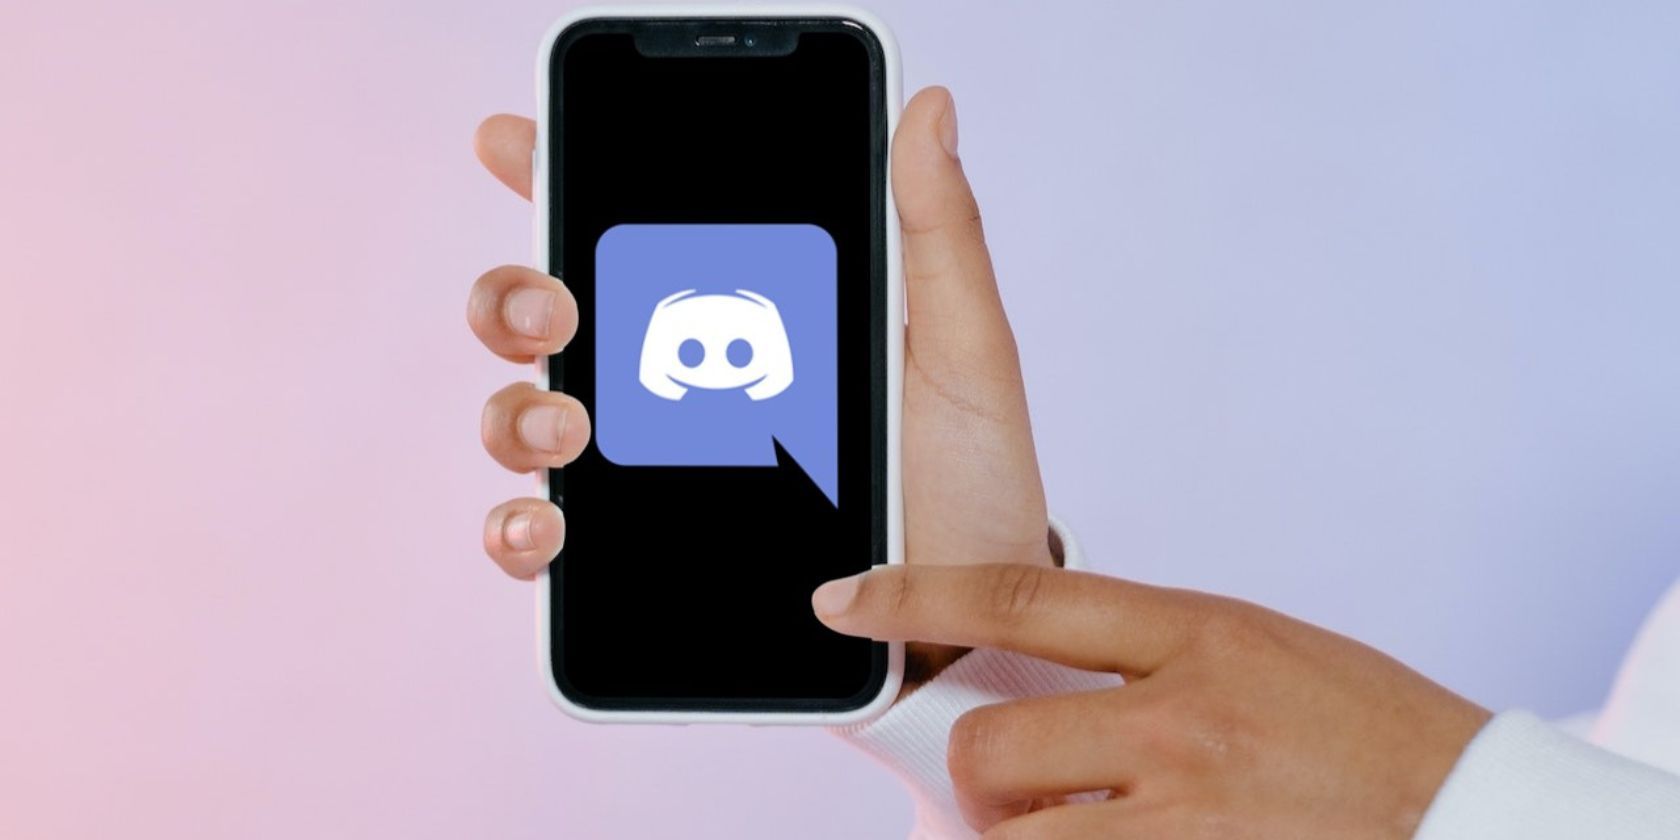 A finger pointing at the Discord logo on a phone